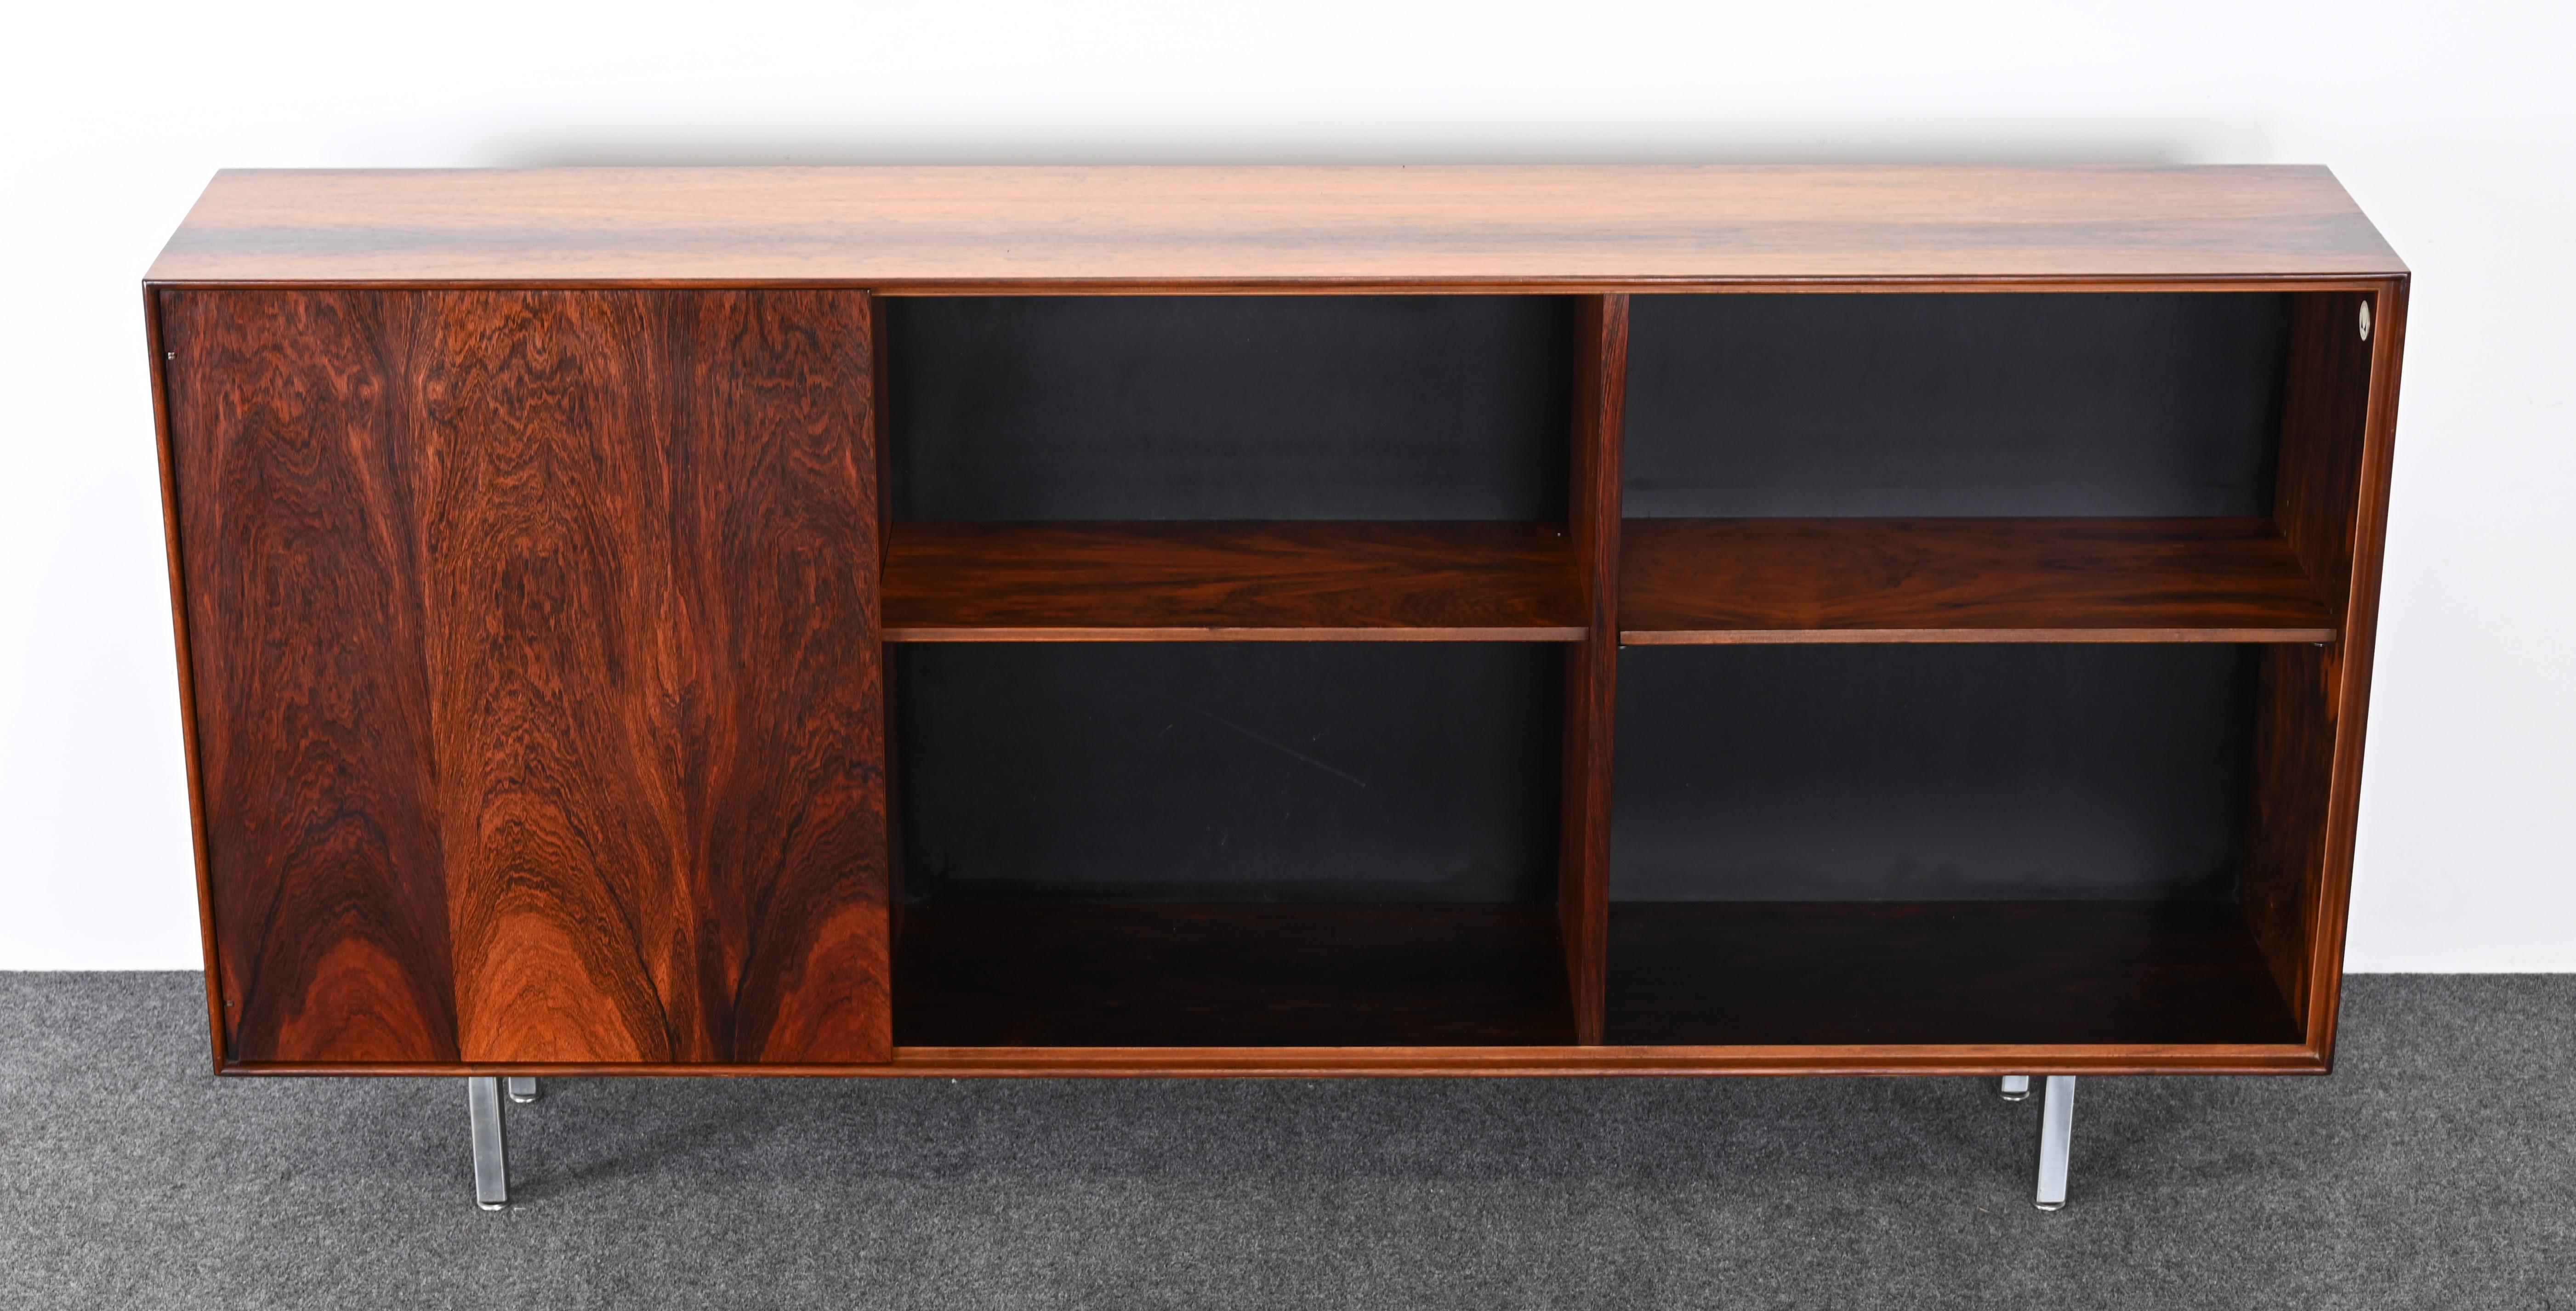 Mid-20th Century Rosewood Thin Edge Bookshelf by George Nelson for Herman Miller, 1950s For Sale